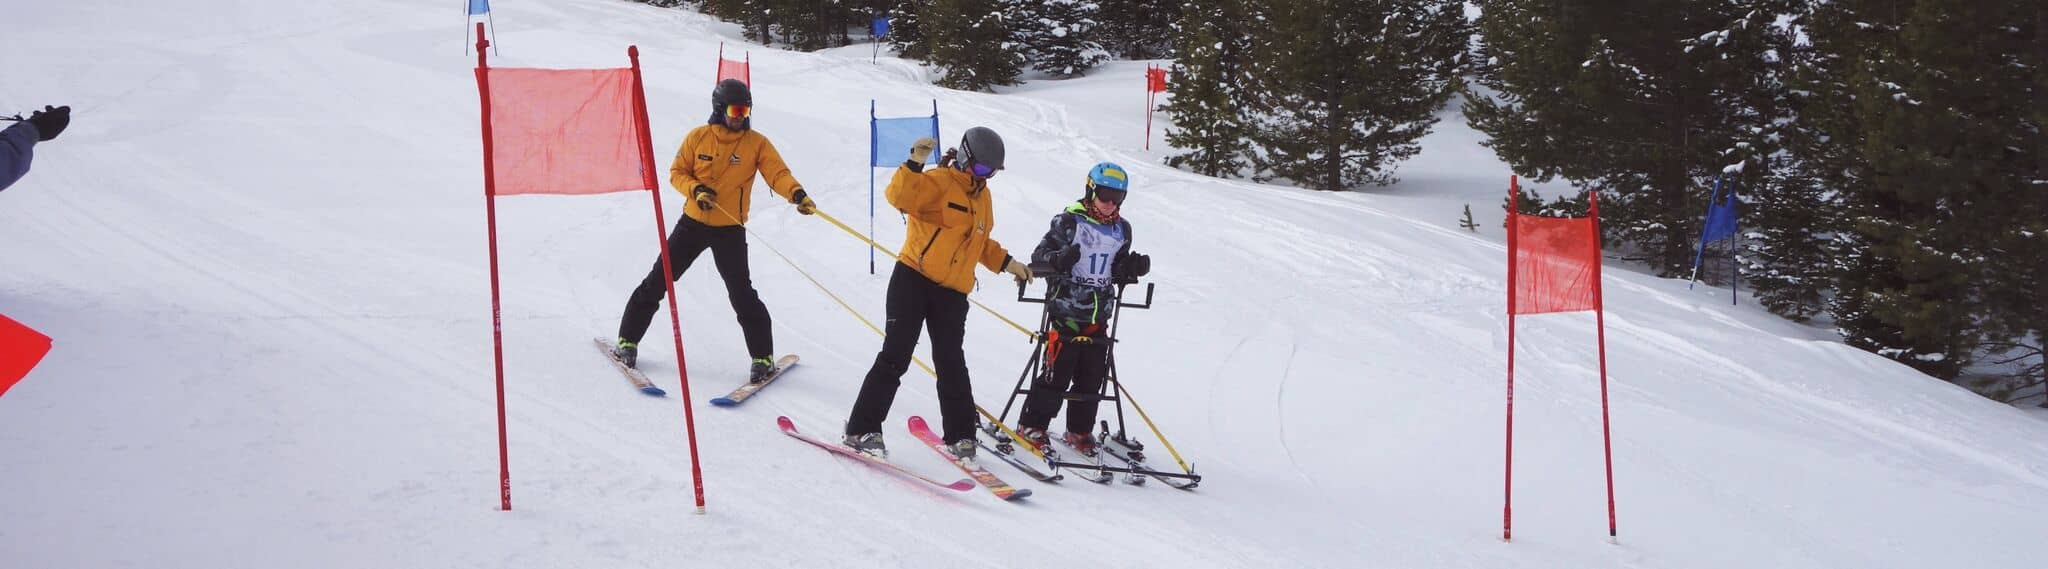 Paralympic Skier